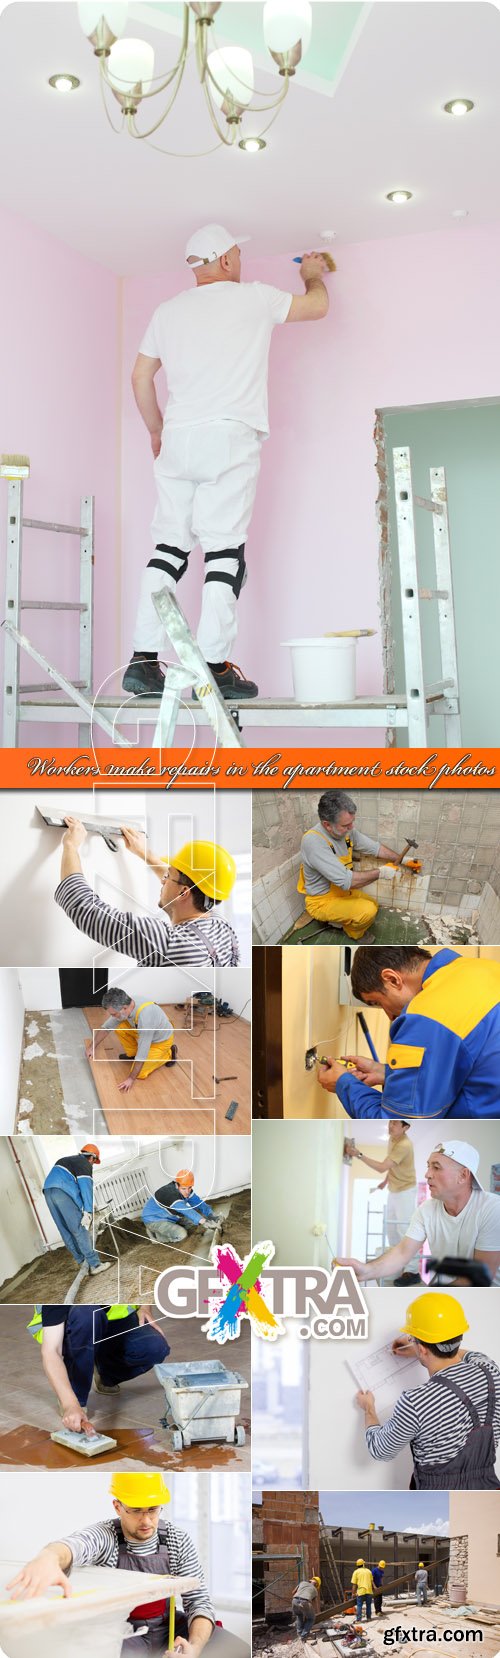 Workers make repairs in the apartment stock photos